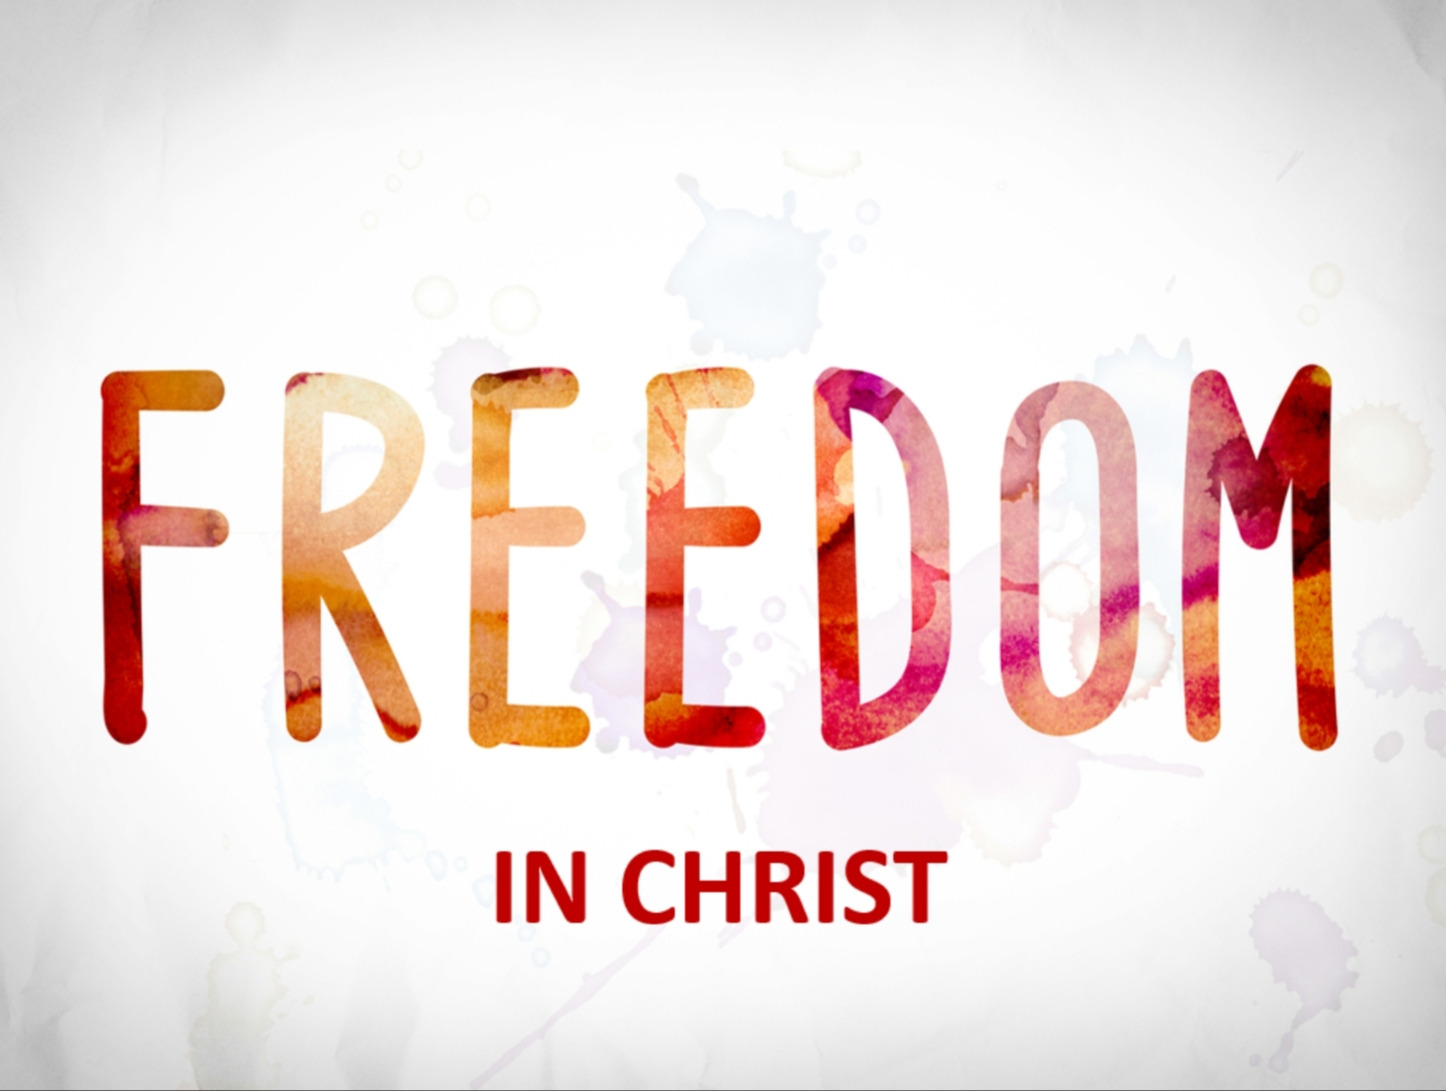 There is a freedom in Christ